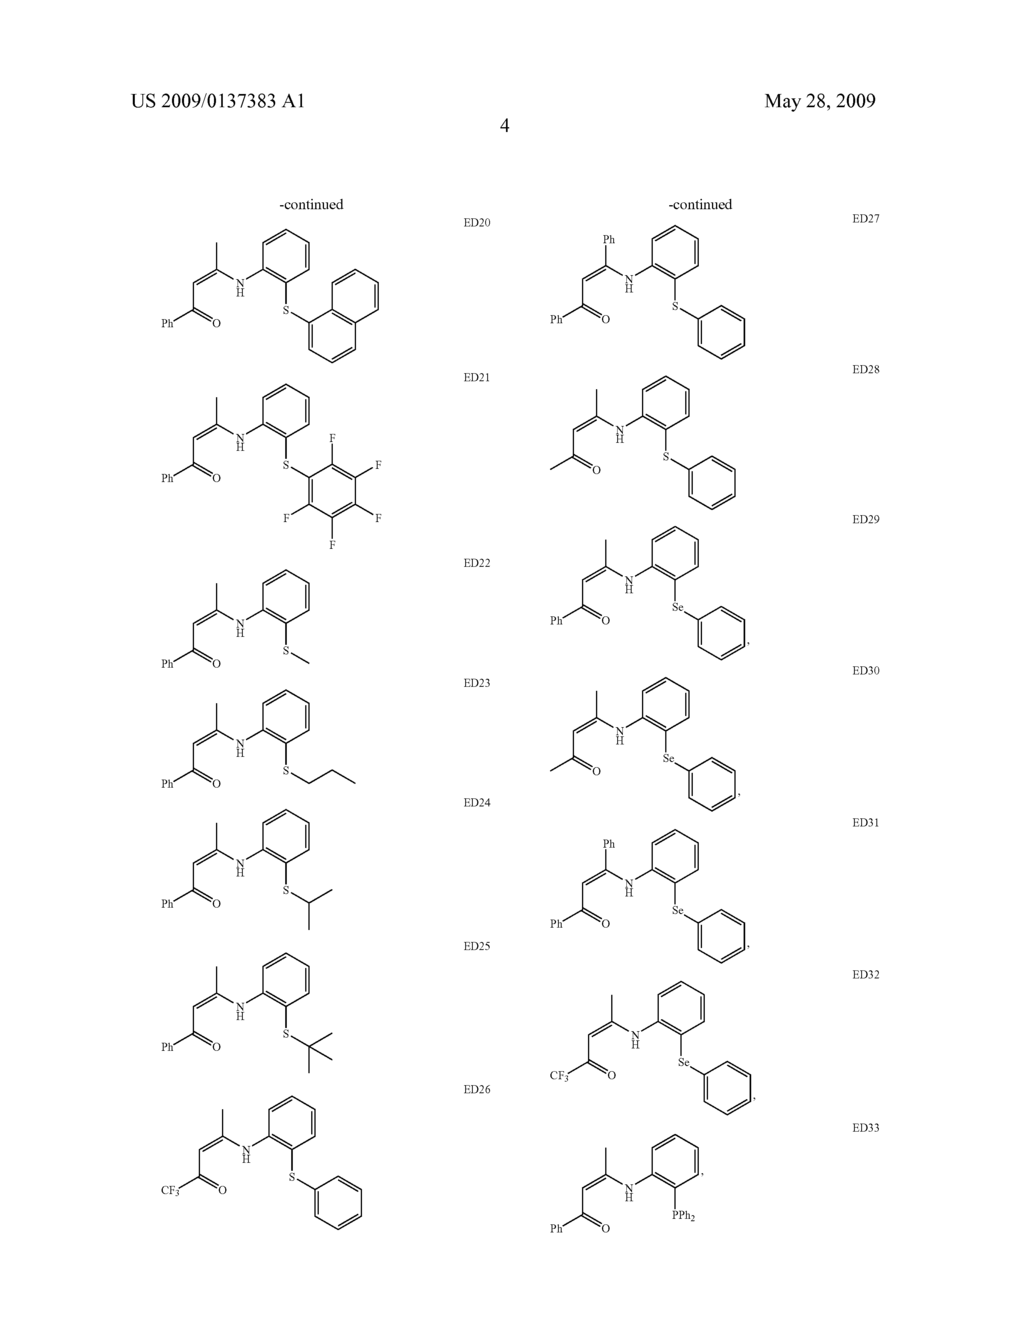  CLASS OF ORGANIC COMPOUNDS CONTAINING HETEROATOM AND ITS APPLICATIONS IN PREPARING SINGLE-SITE ZIEGLER-NATTA CATALYST - diagram, schematic, and image 07